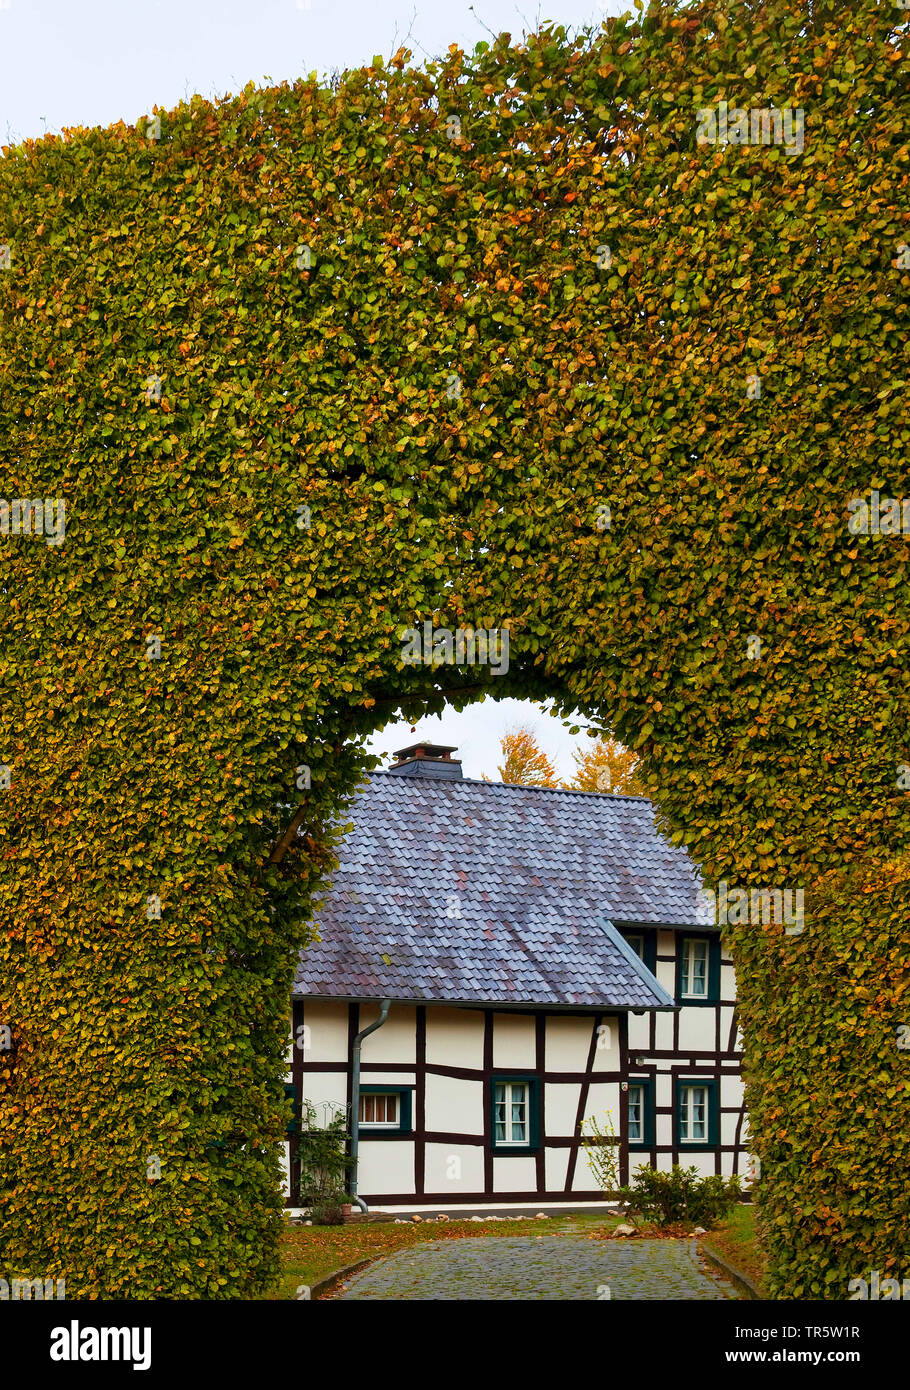 common beech (Fagus sylvatica), half-timbered house behind metre-high beech hedge with archway, district Hoefen, Germany, North Rhine-Westphalia, Eifel, Monschau Stock Photo